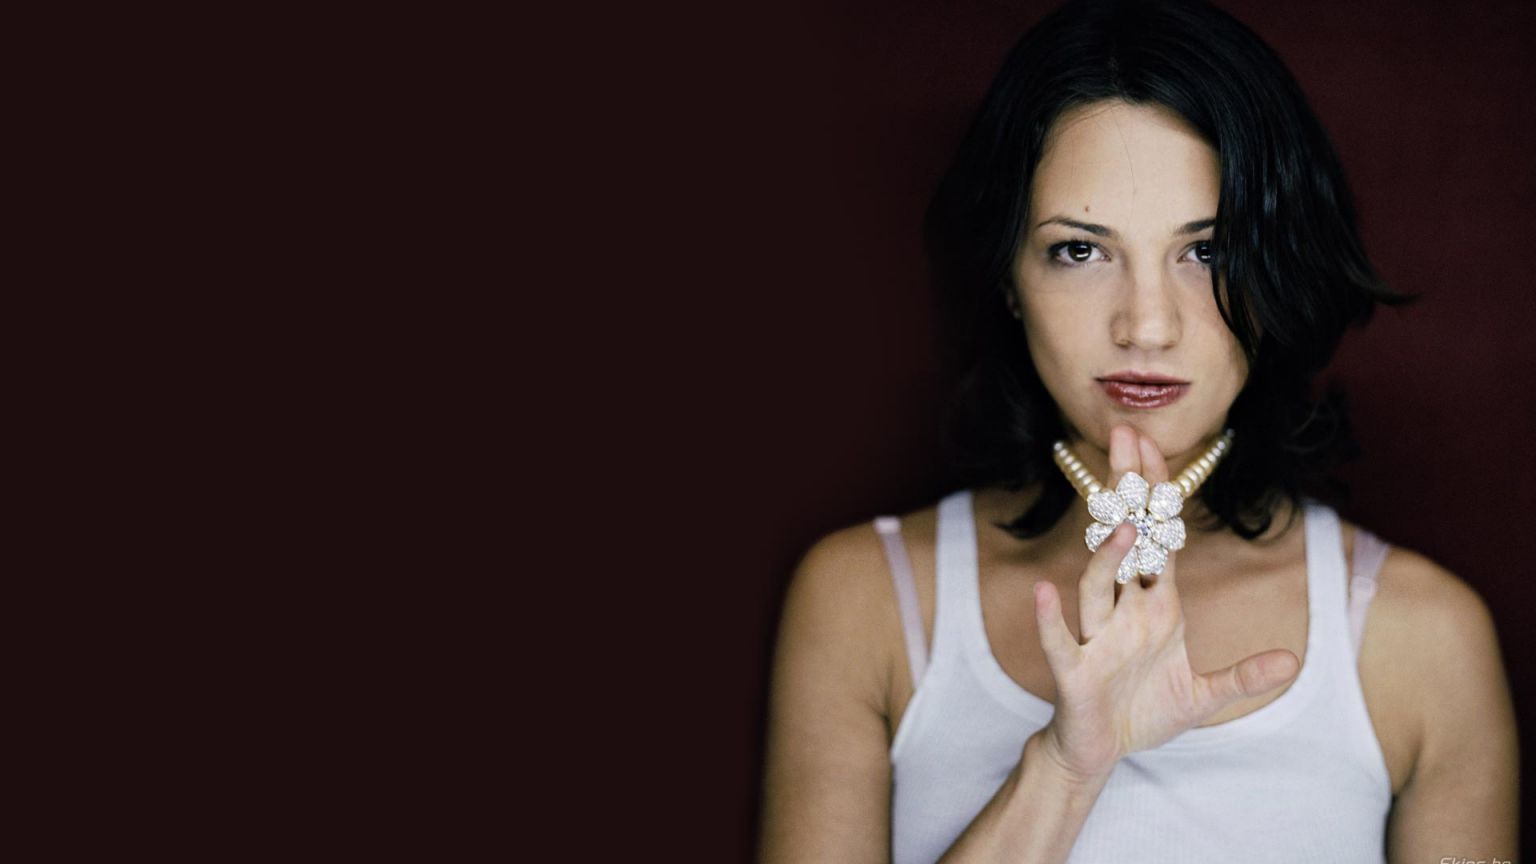 Asia Argento Movies wallpaper in 1536x864 resolution